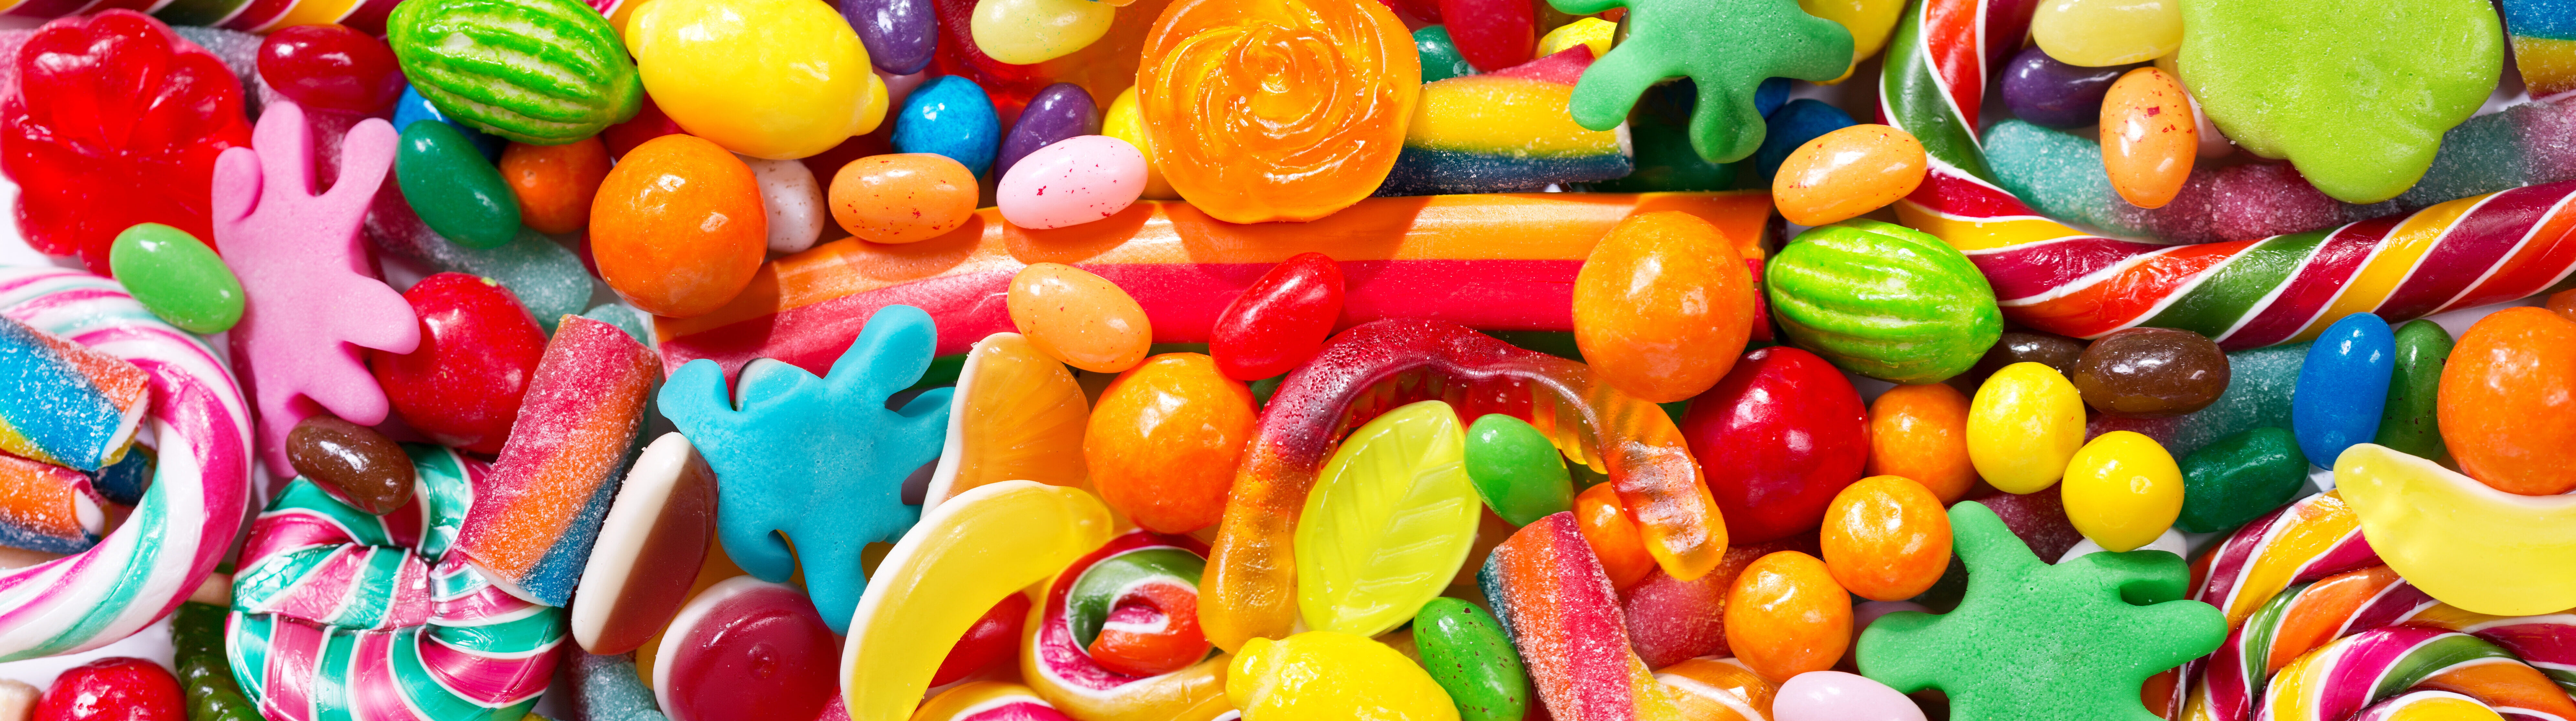 Using candy selection to explain cluster analysis